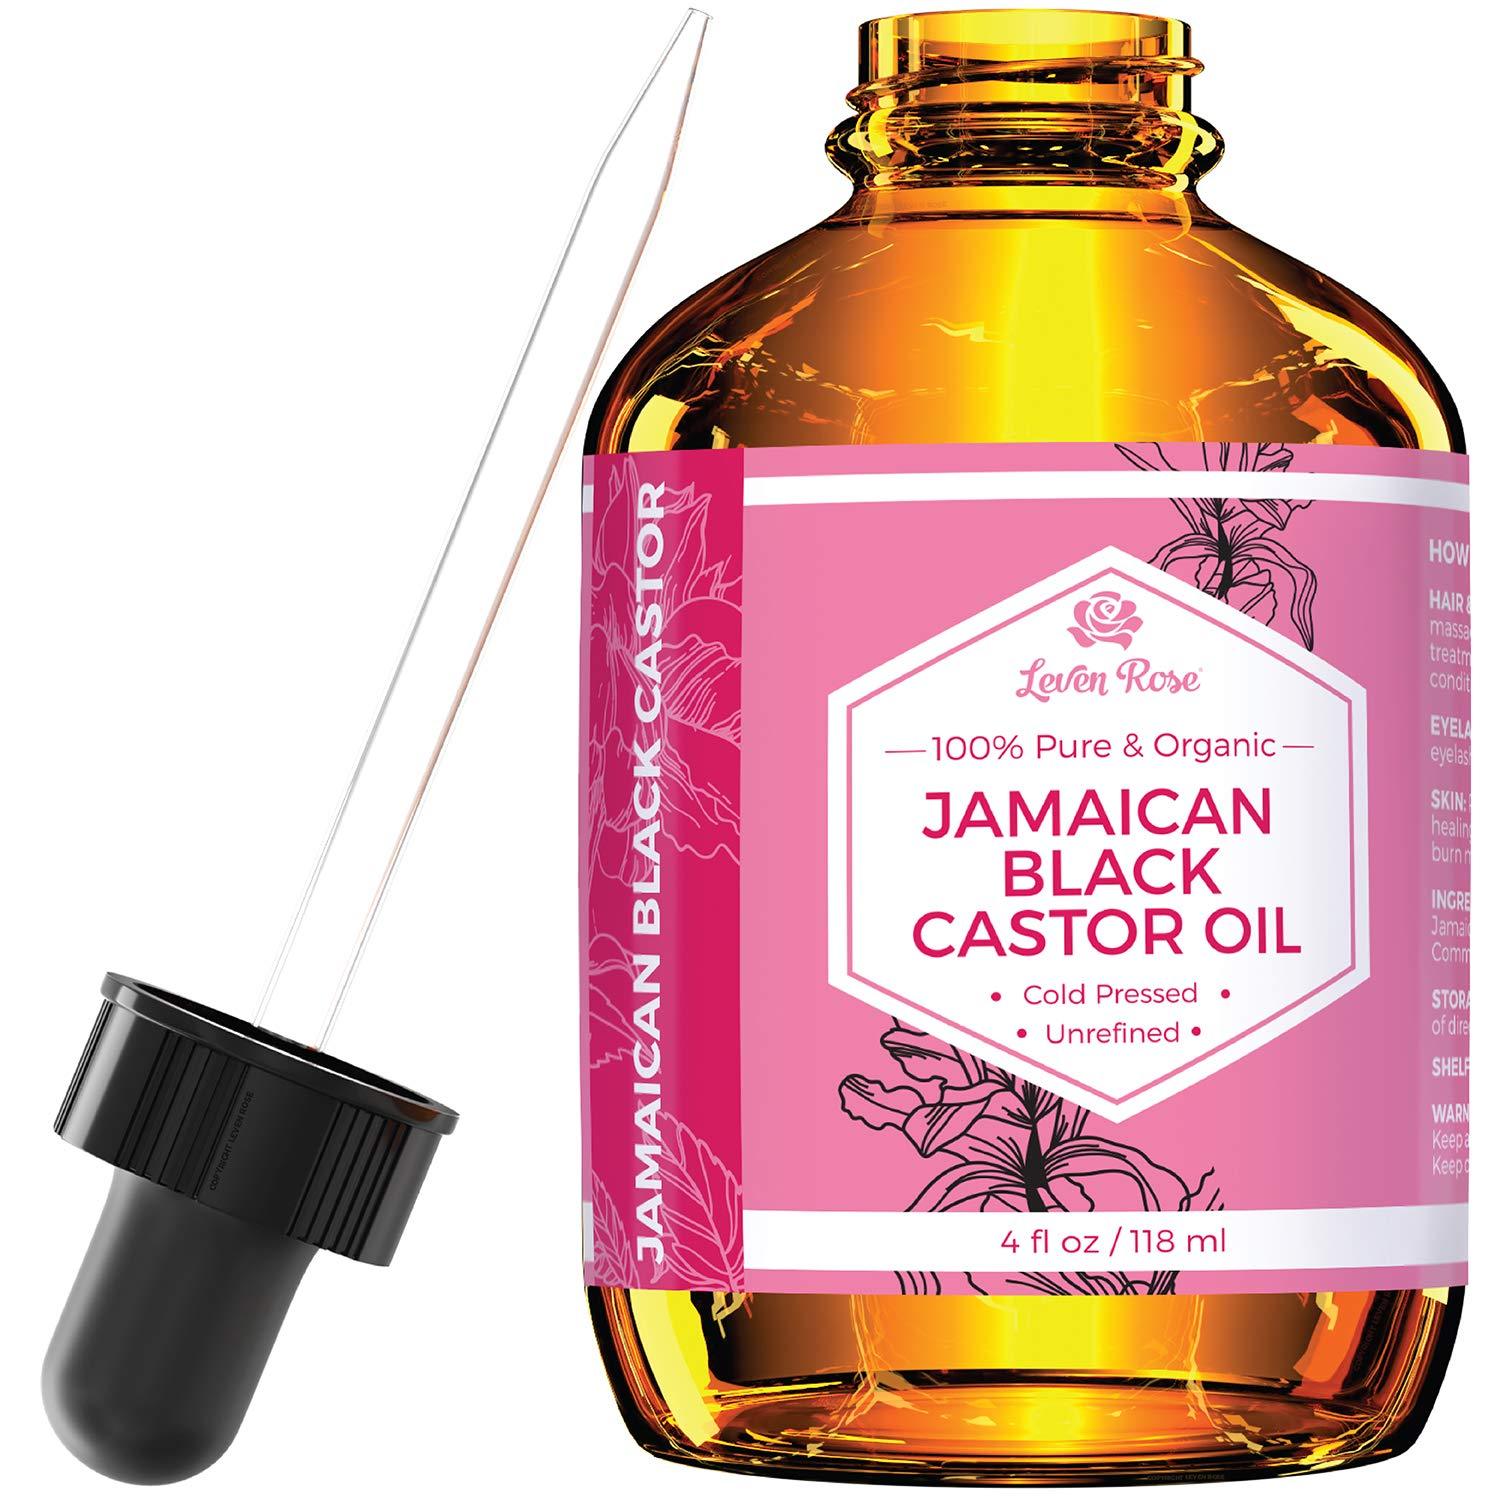 Jamaican Black Castor Seed Oil by Leven Rose, 100% Natural ...